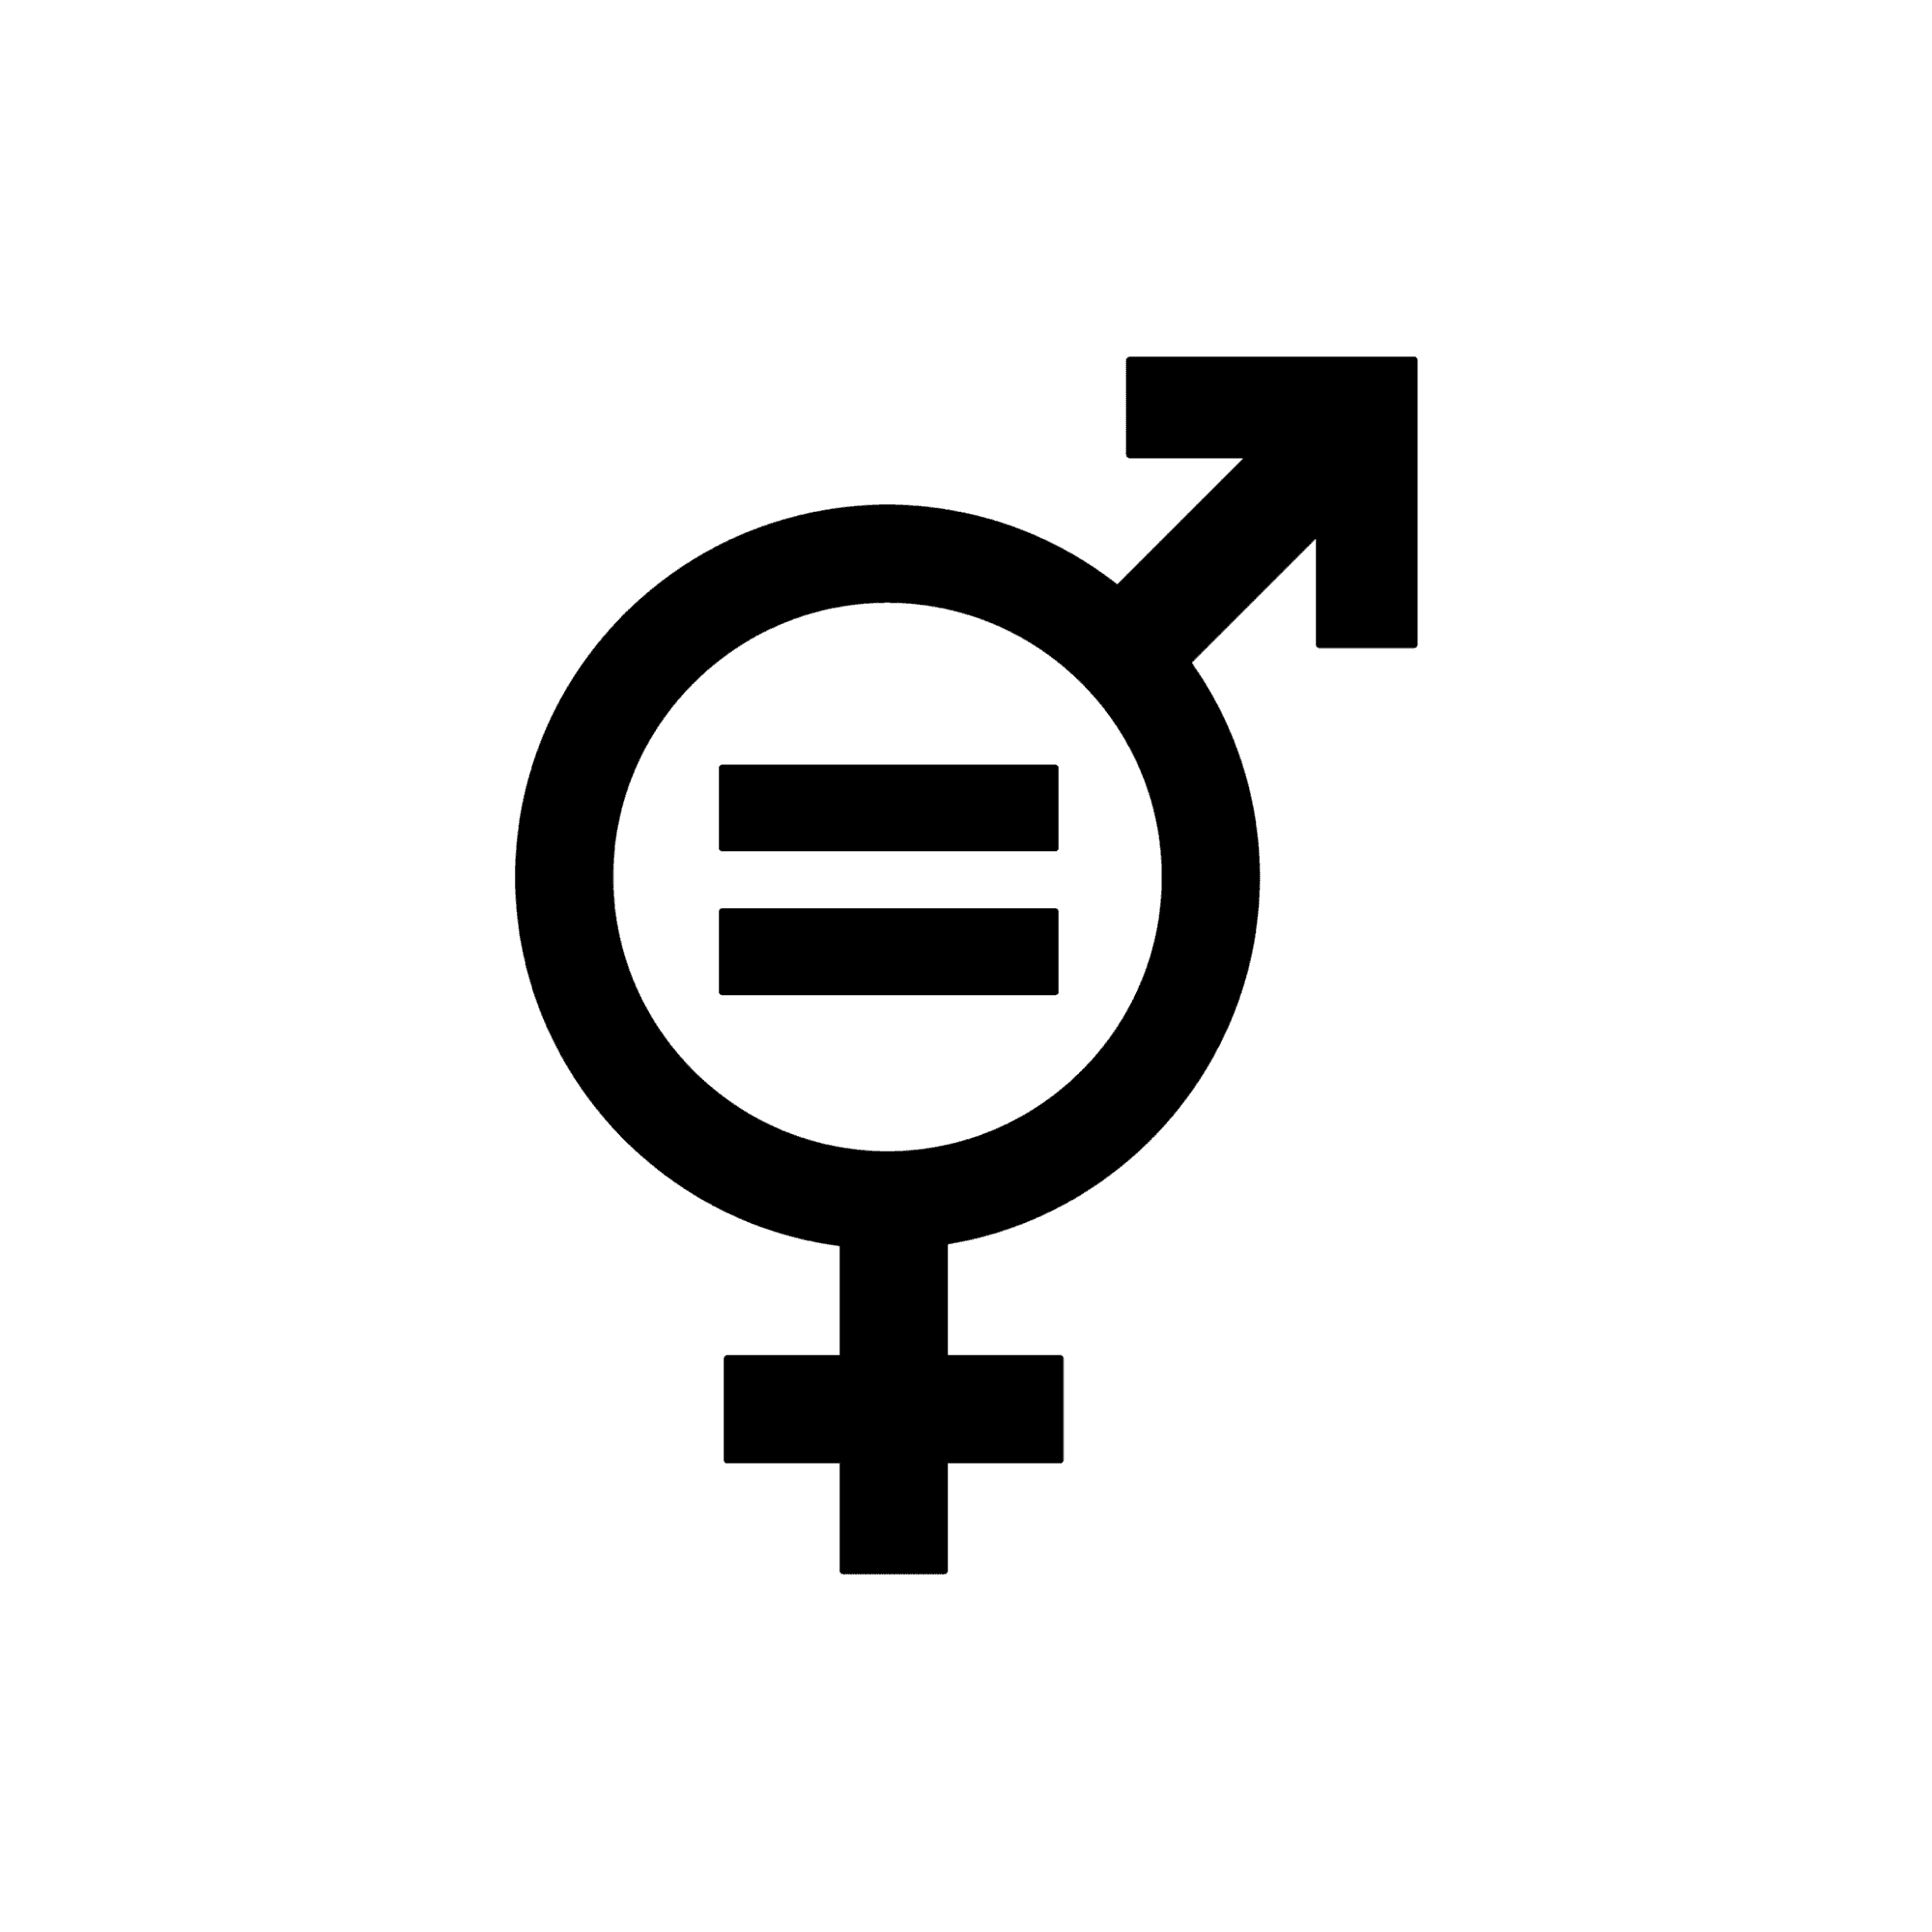 supporting Gender Equality